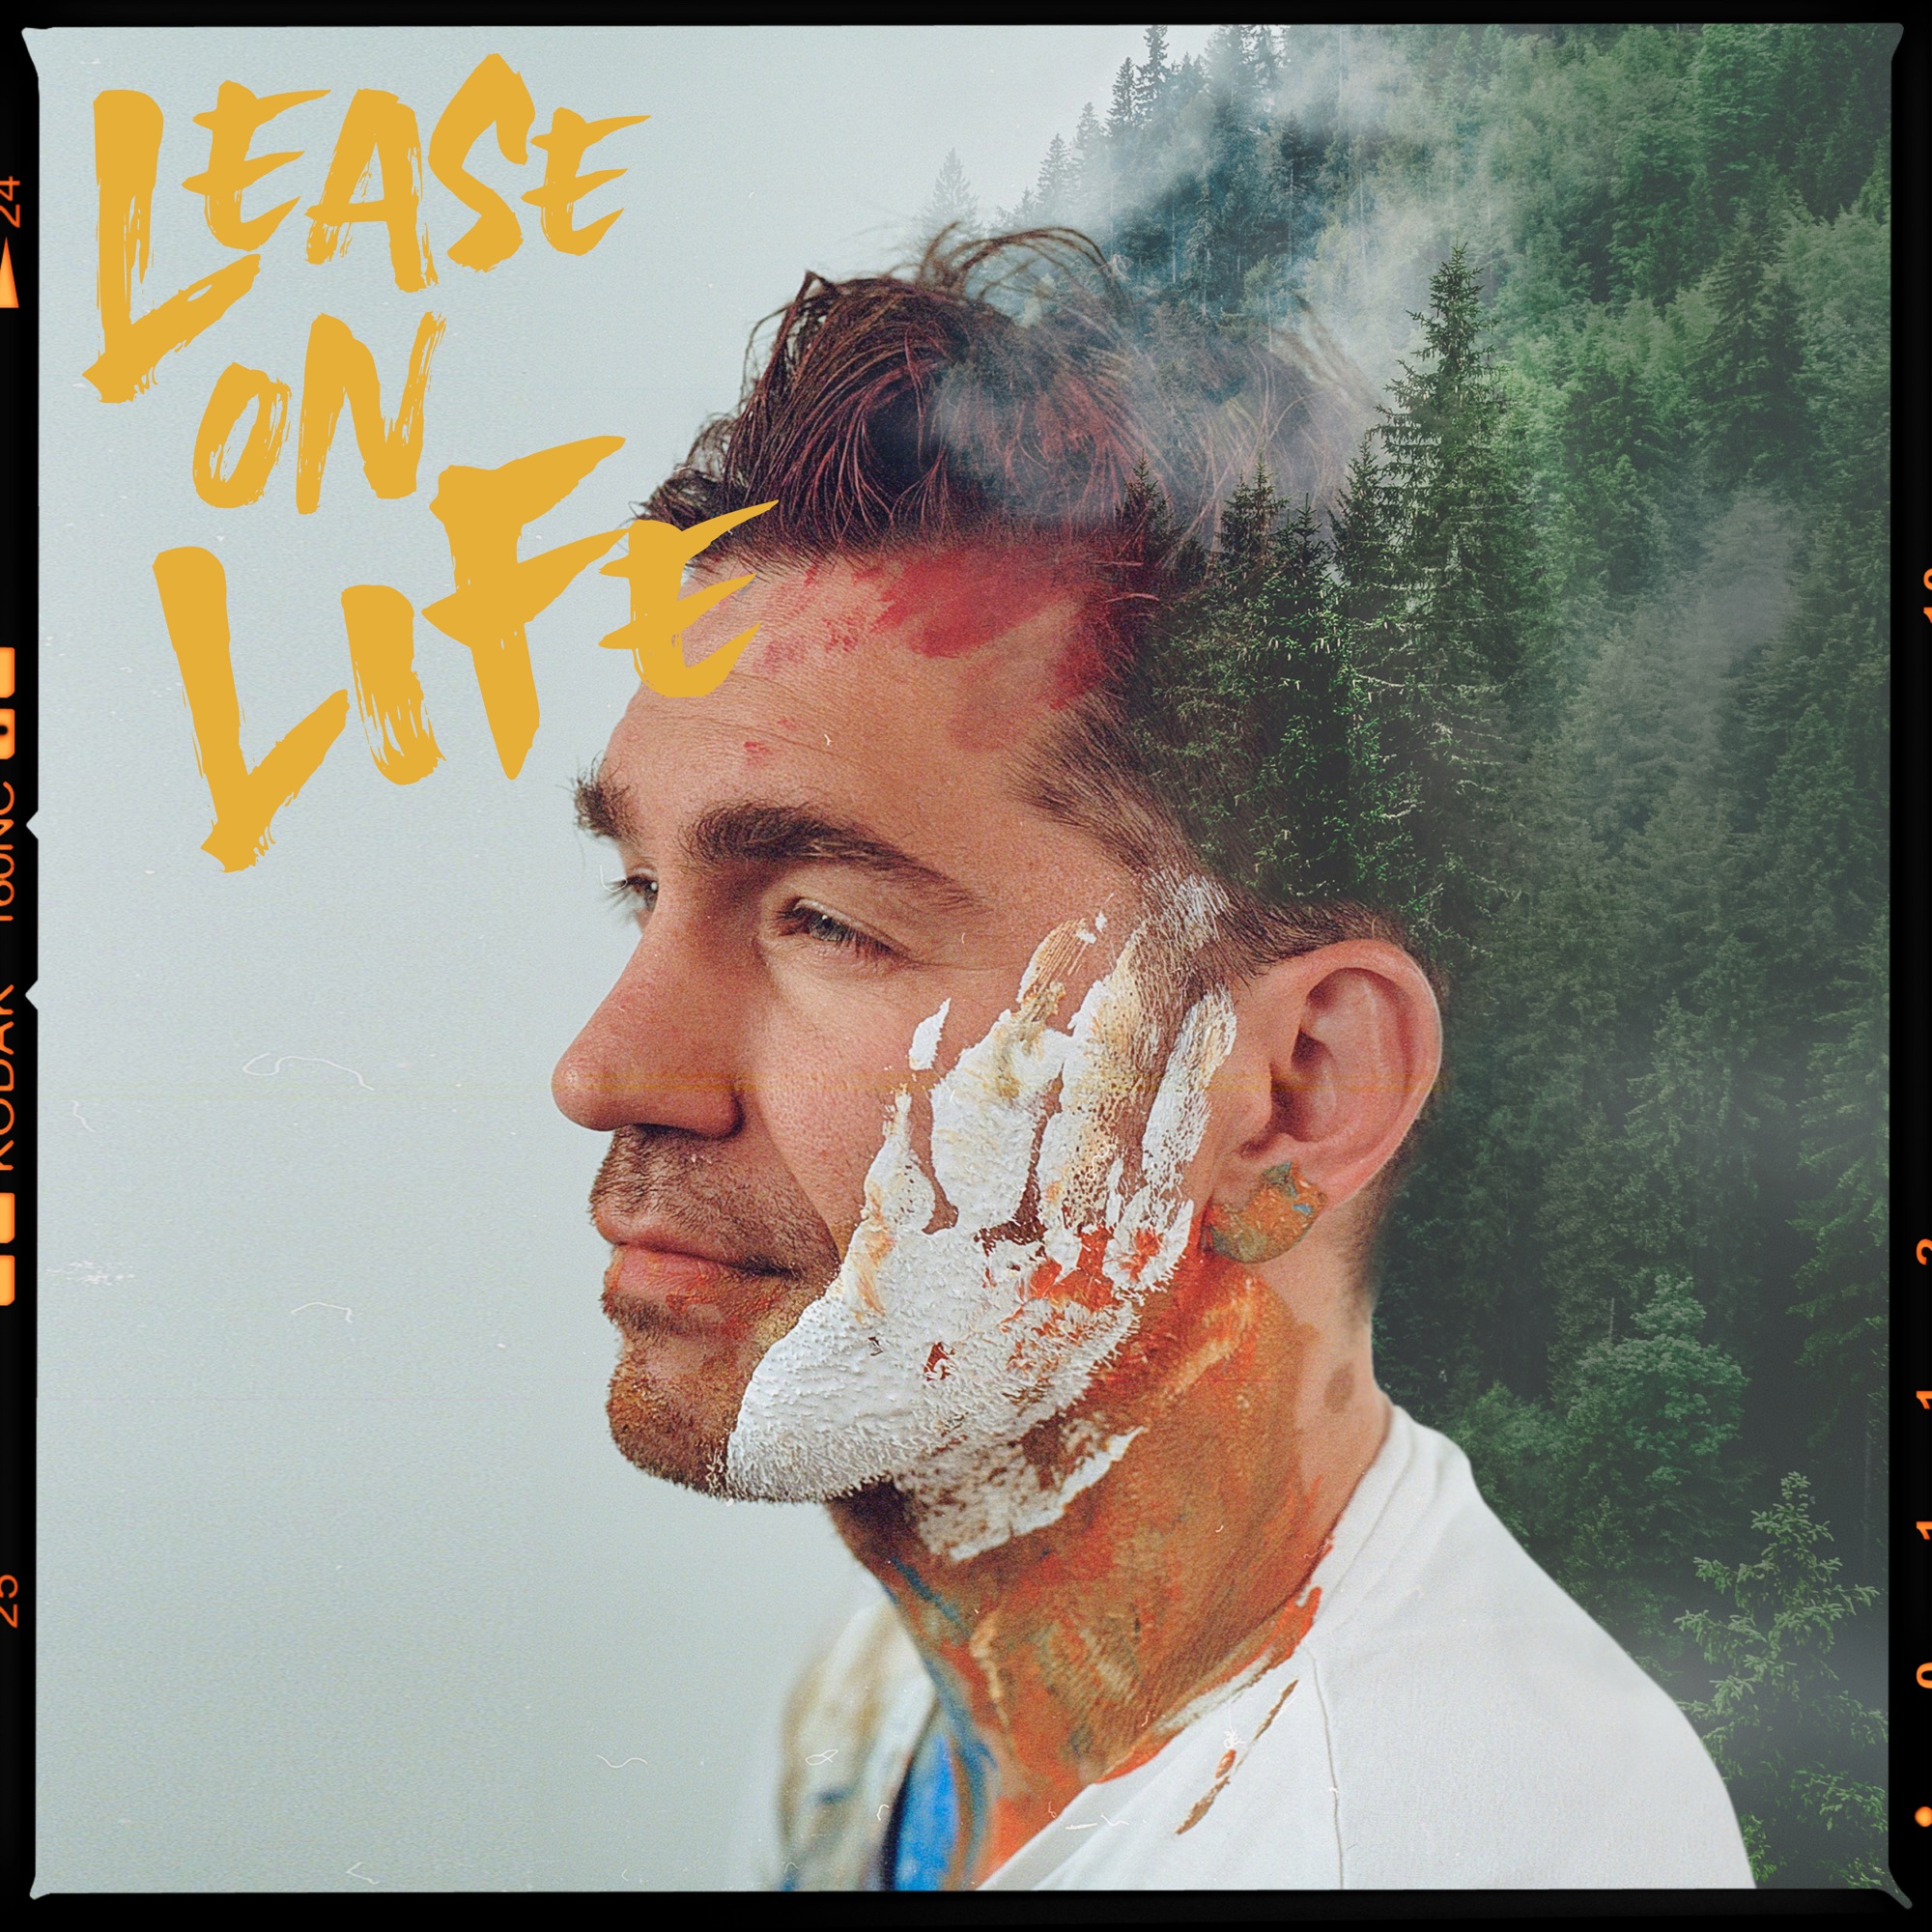 Andy Grammer - Lease On Life - Single